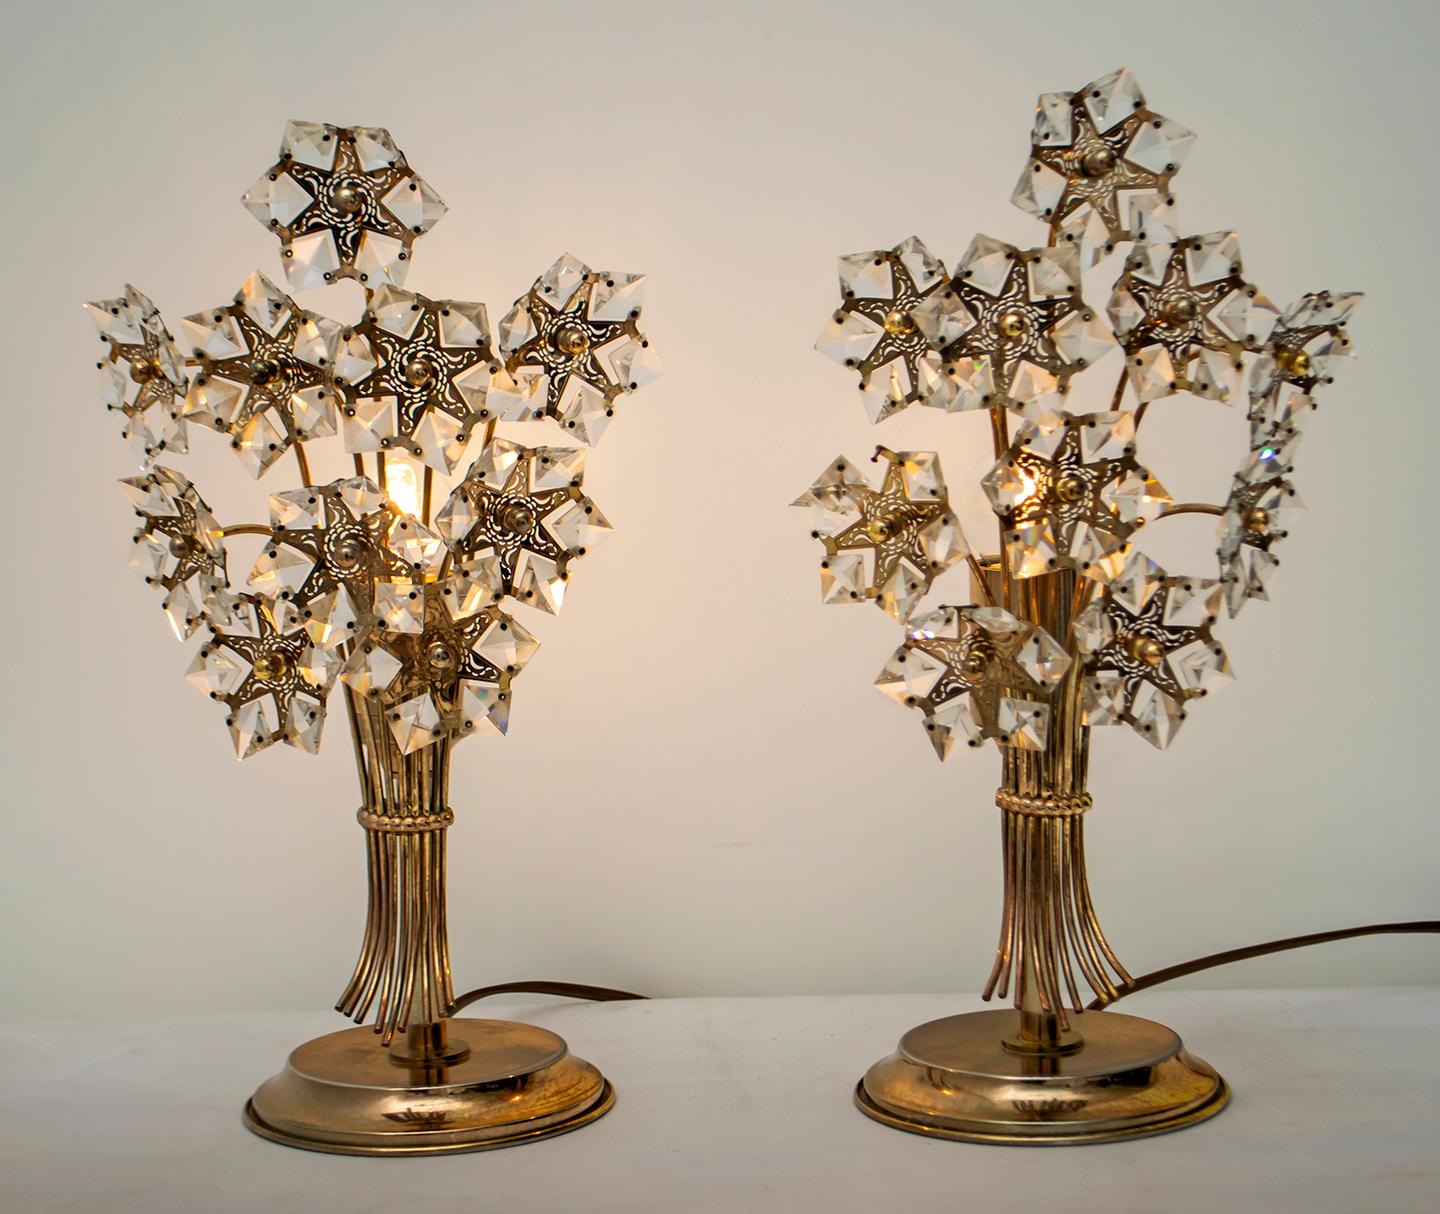 This pair of table lamps has a brass and crystal structure for each lamp, which is very reminiscent of the Maria Theresa style. Beautiful as lamps for your bedroom.
 